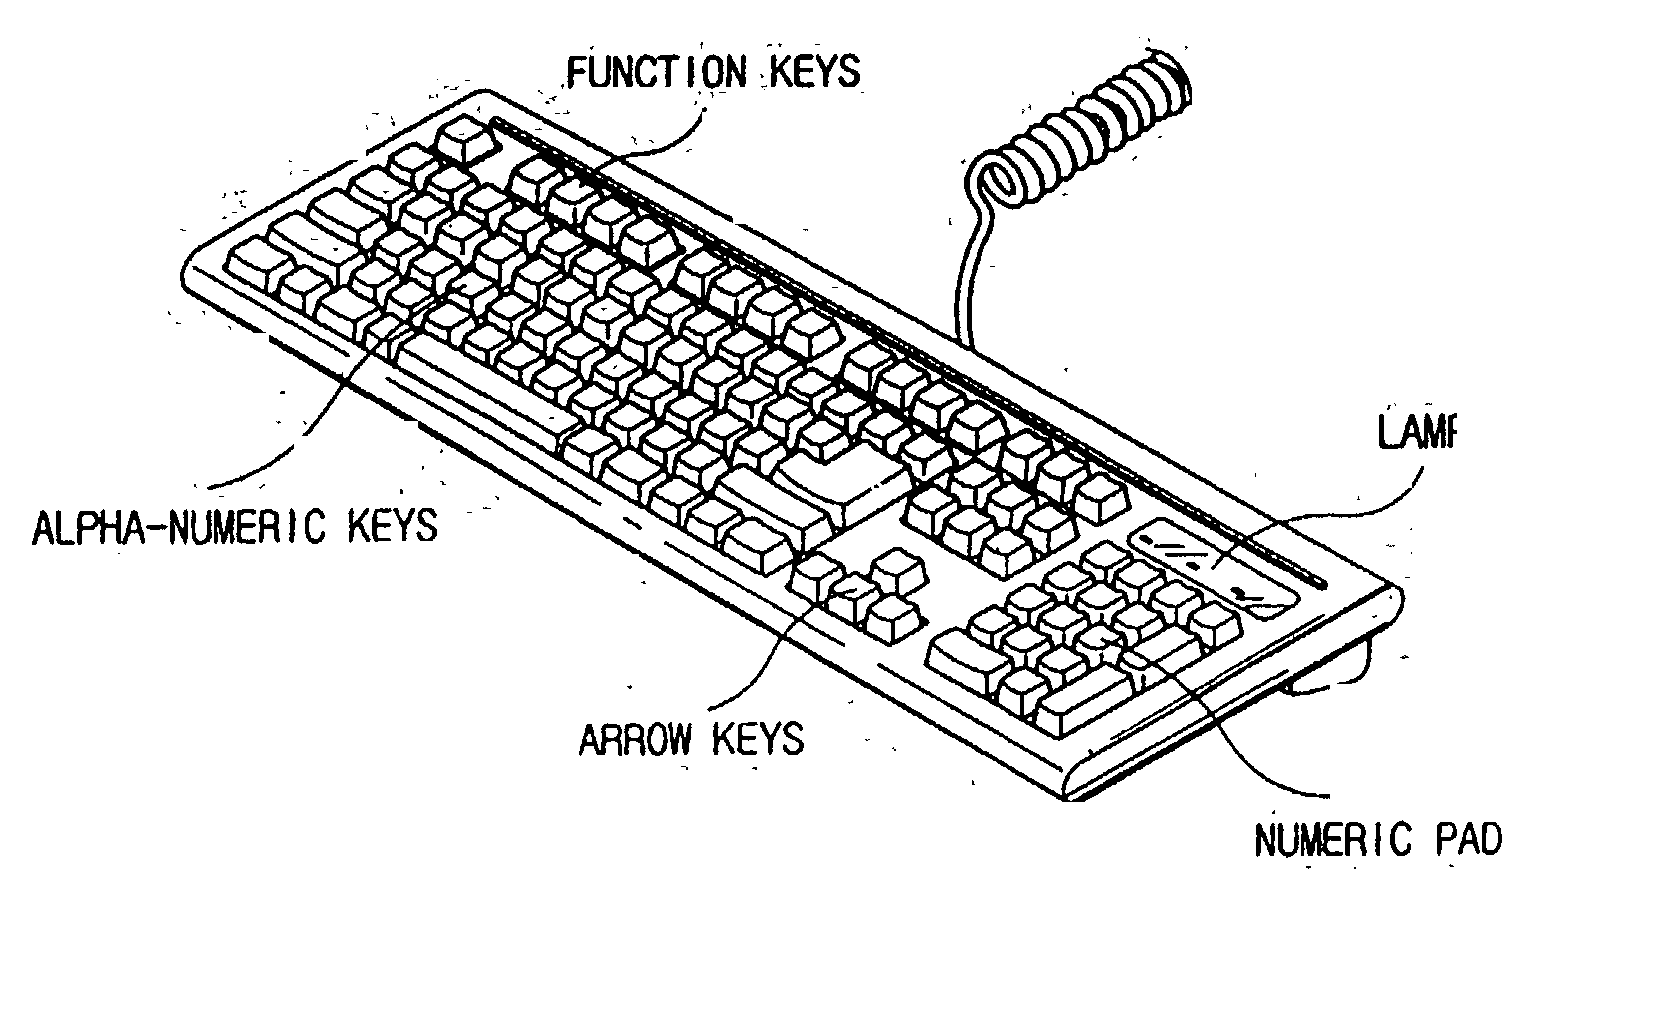 Wired keyboard with built-in web camera